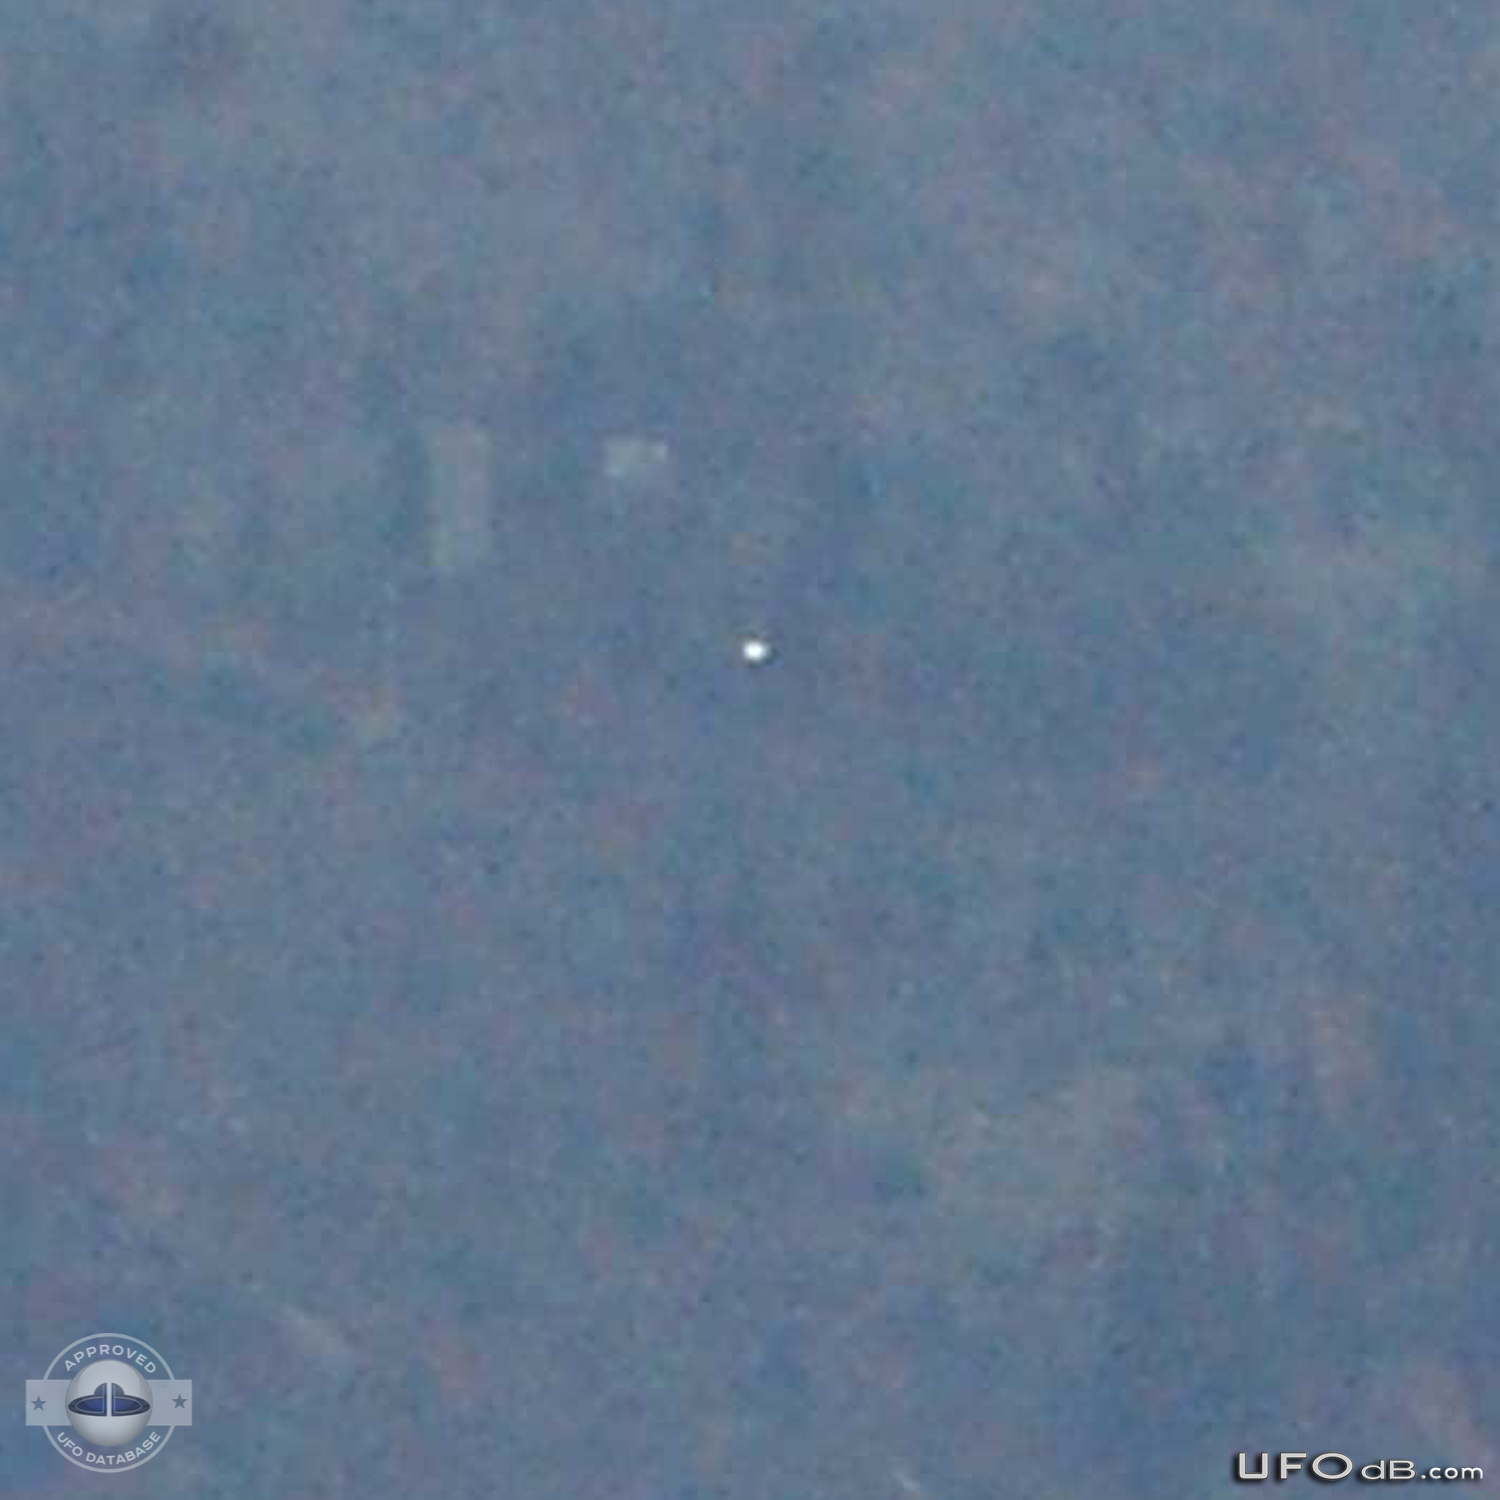 White saucer ufo over the city of Mostar in Bosnia caught on picture UFO Picture #396-2